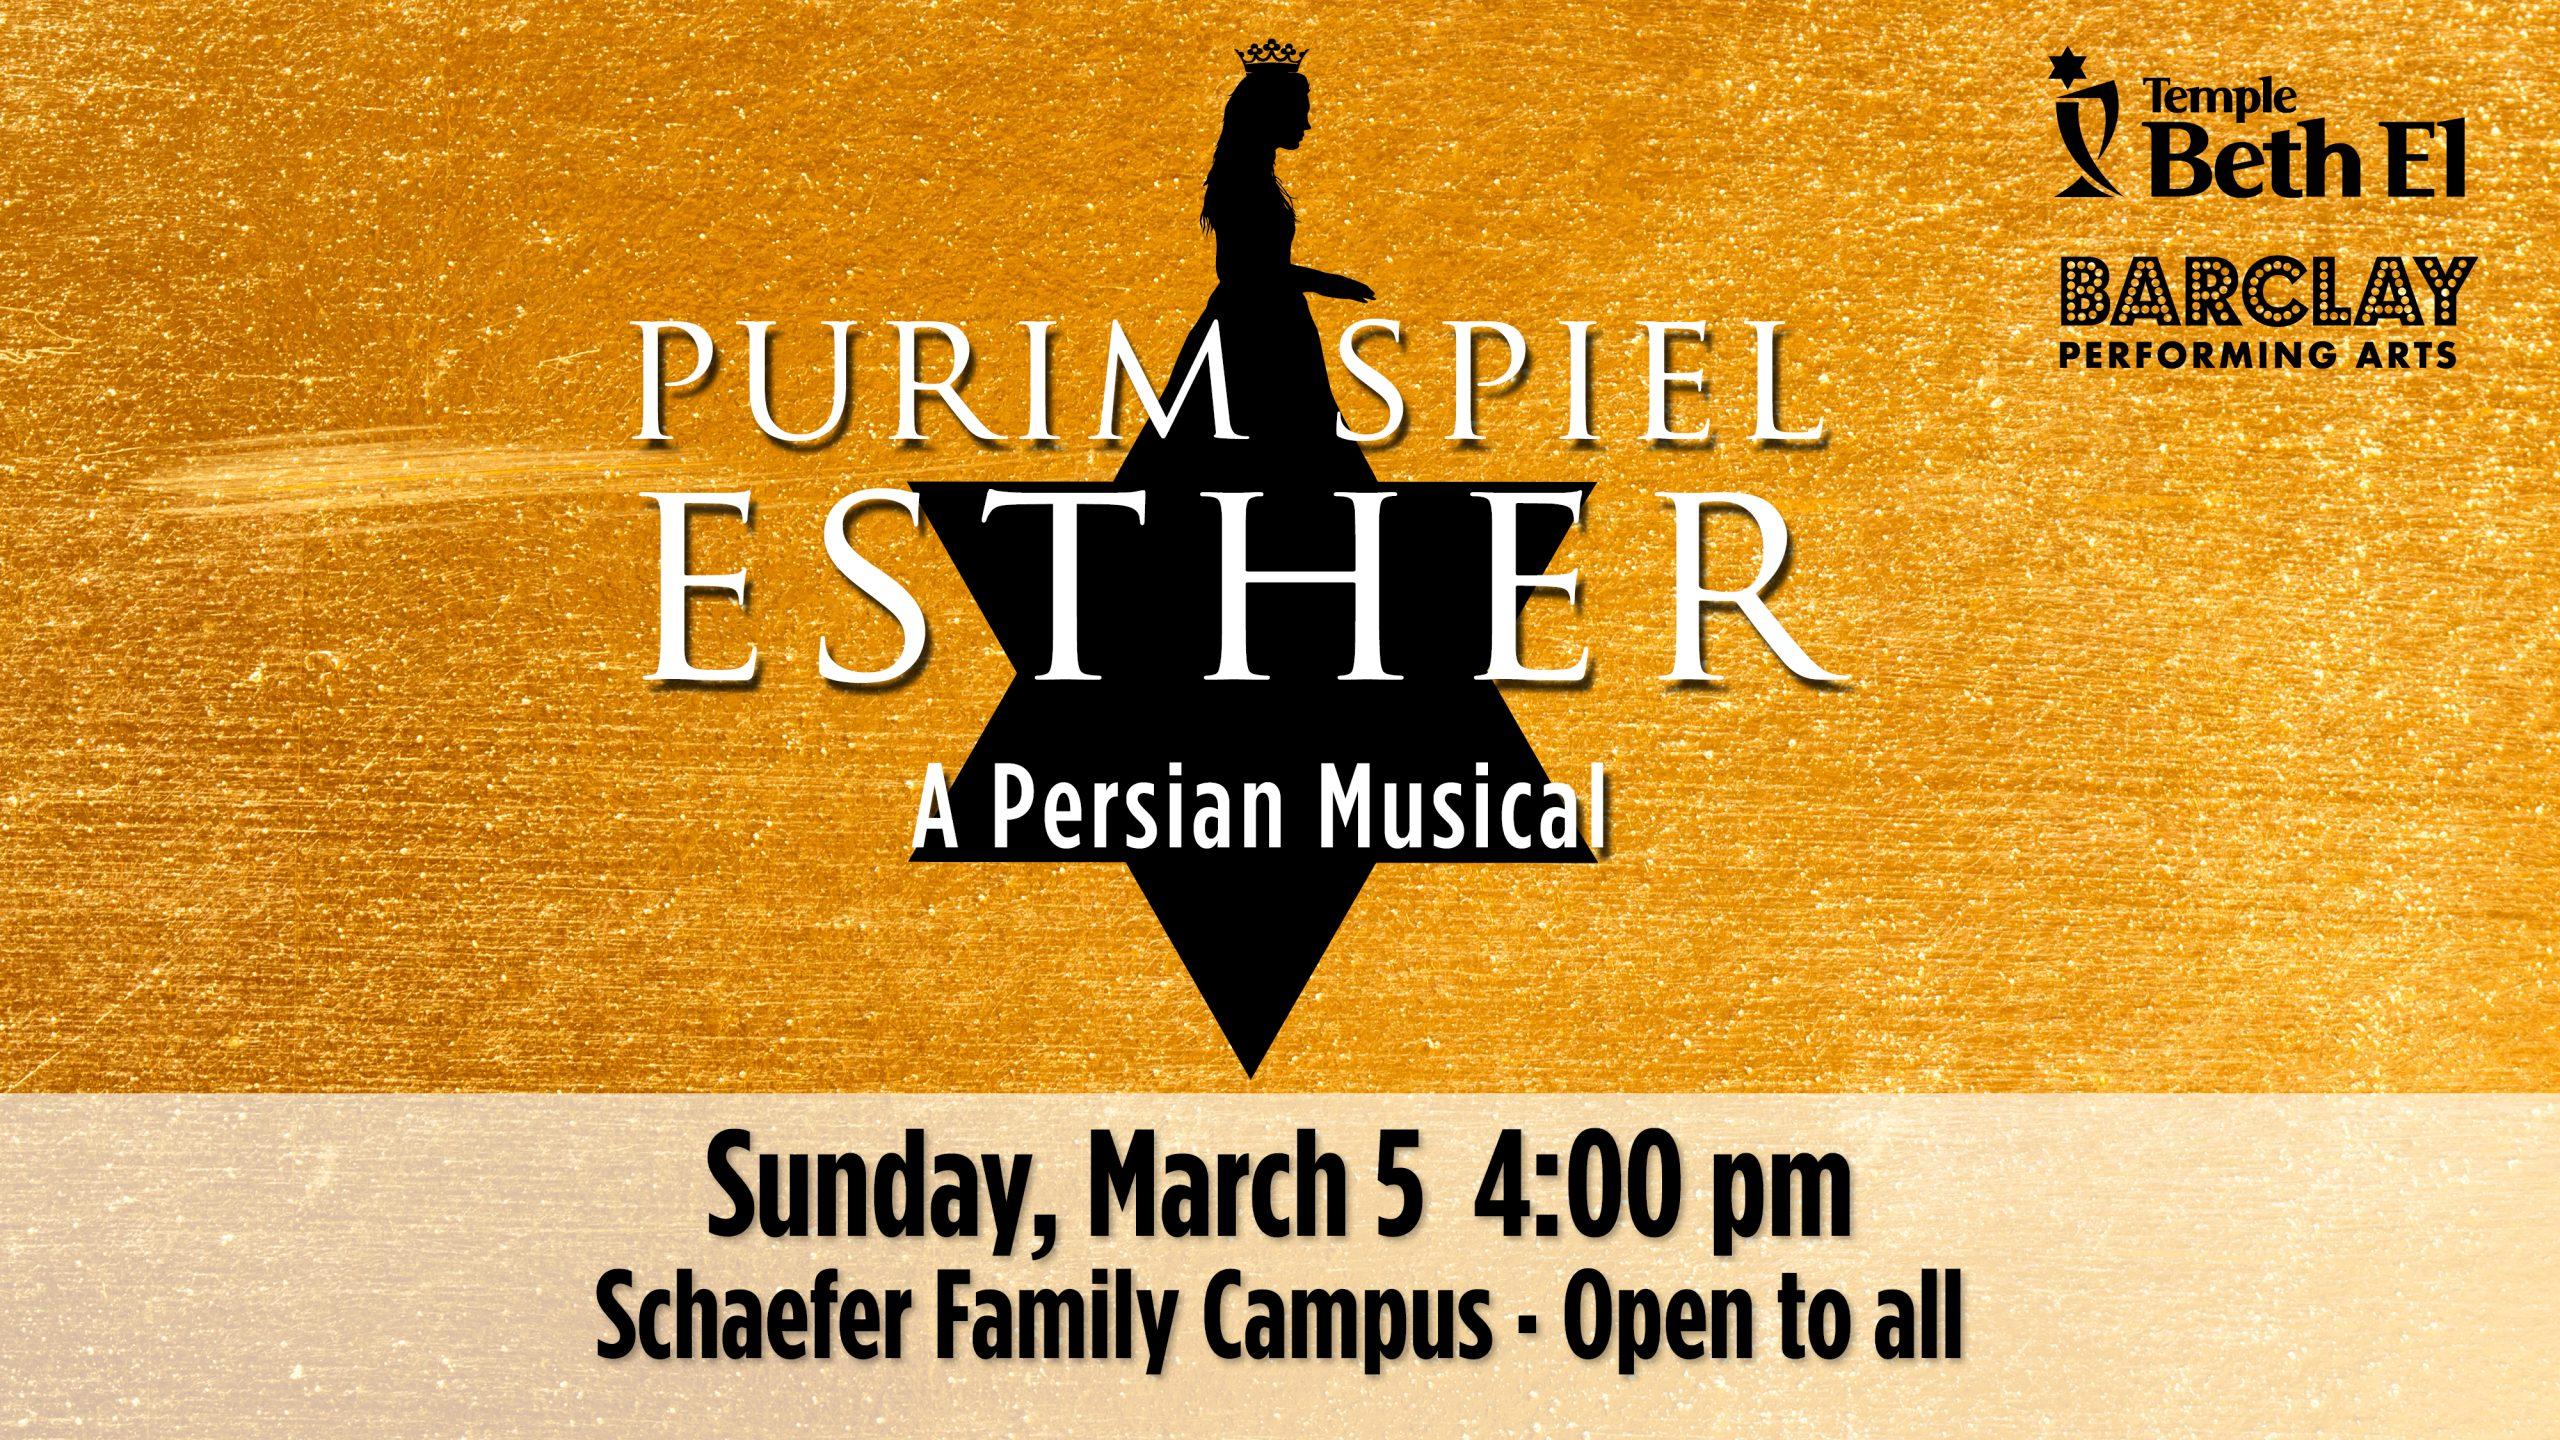 Purim Spiel - Esther a Persian Musical, event graphic for Temple Beth El of Boca Raton Purim Spiel directed by Barclay's